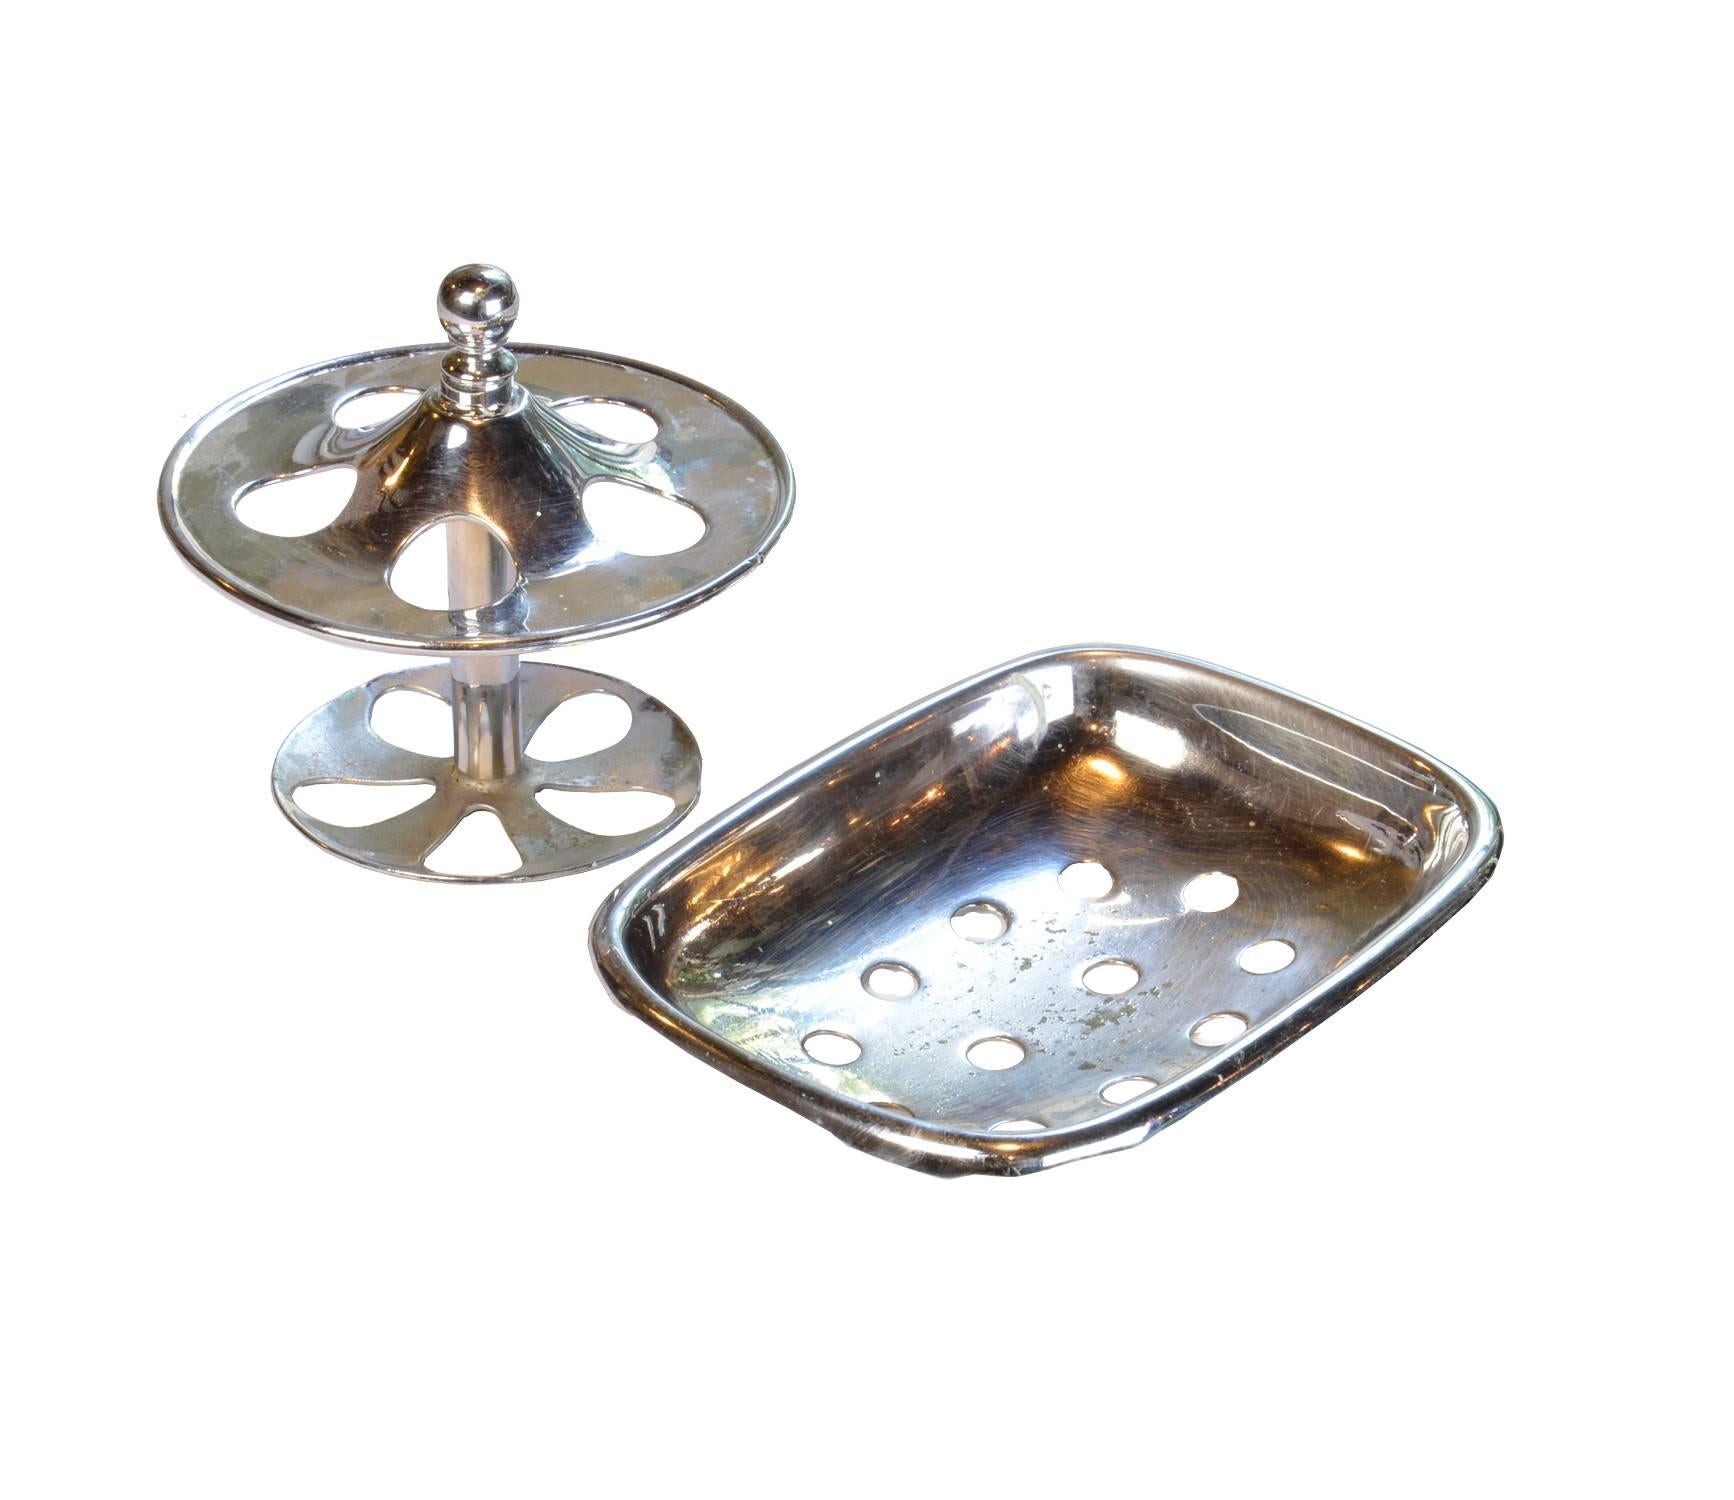 American Classical Early 20th Century Nickel-Plated Soap Dish and Cup Holder